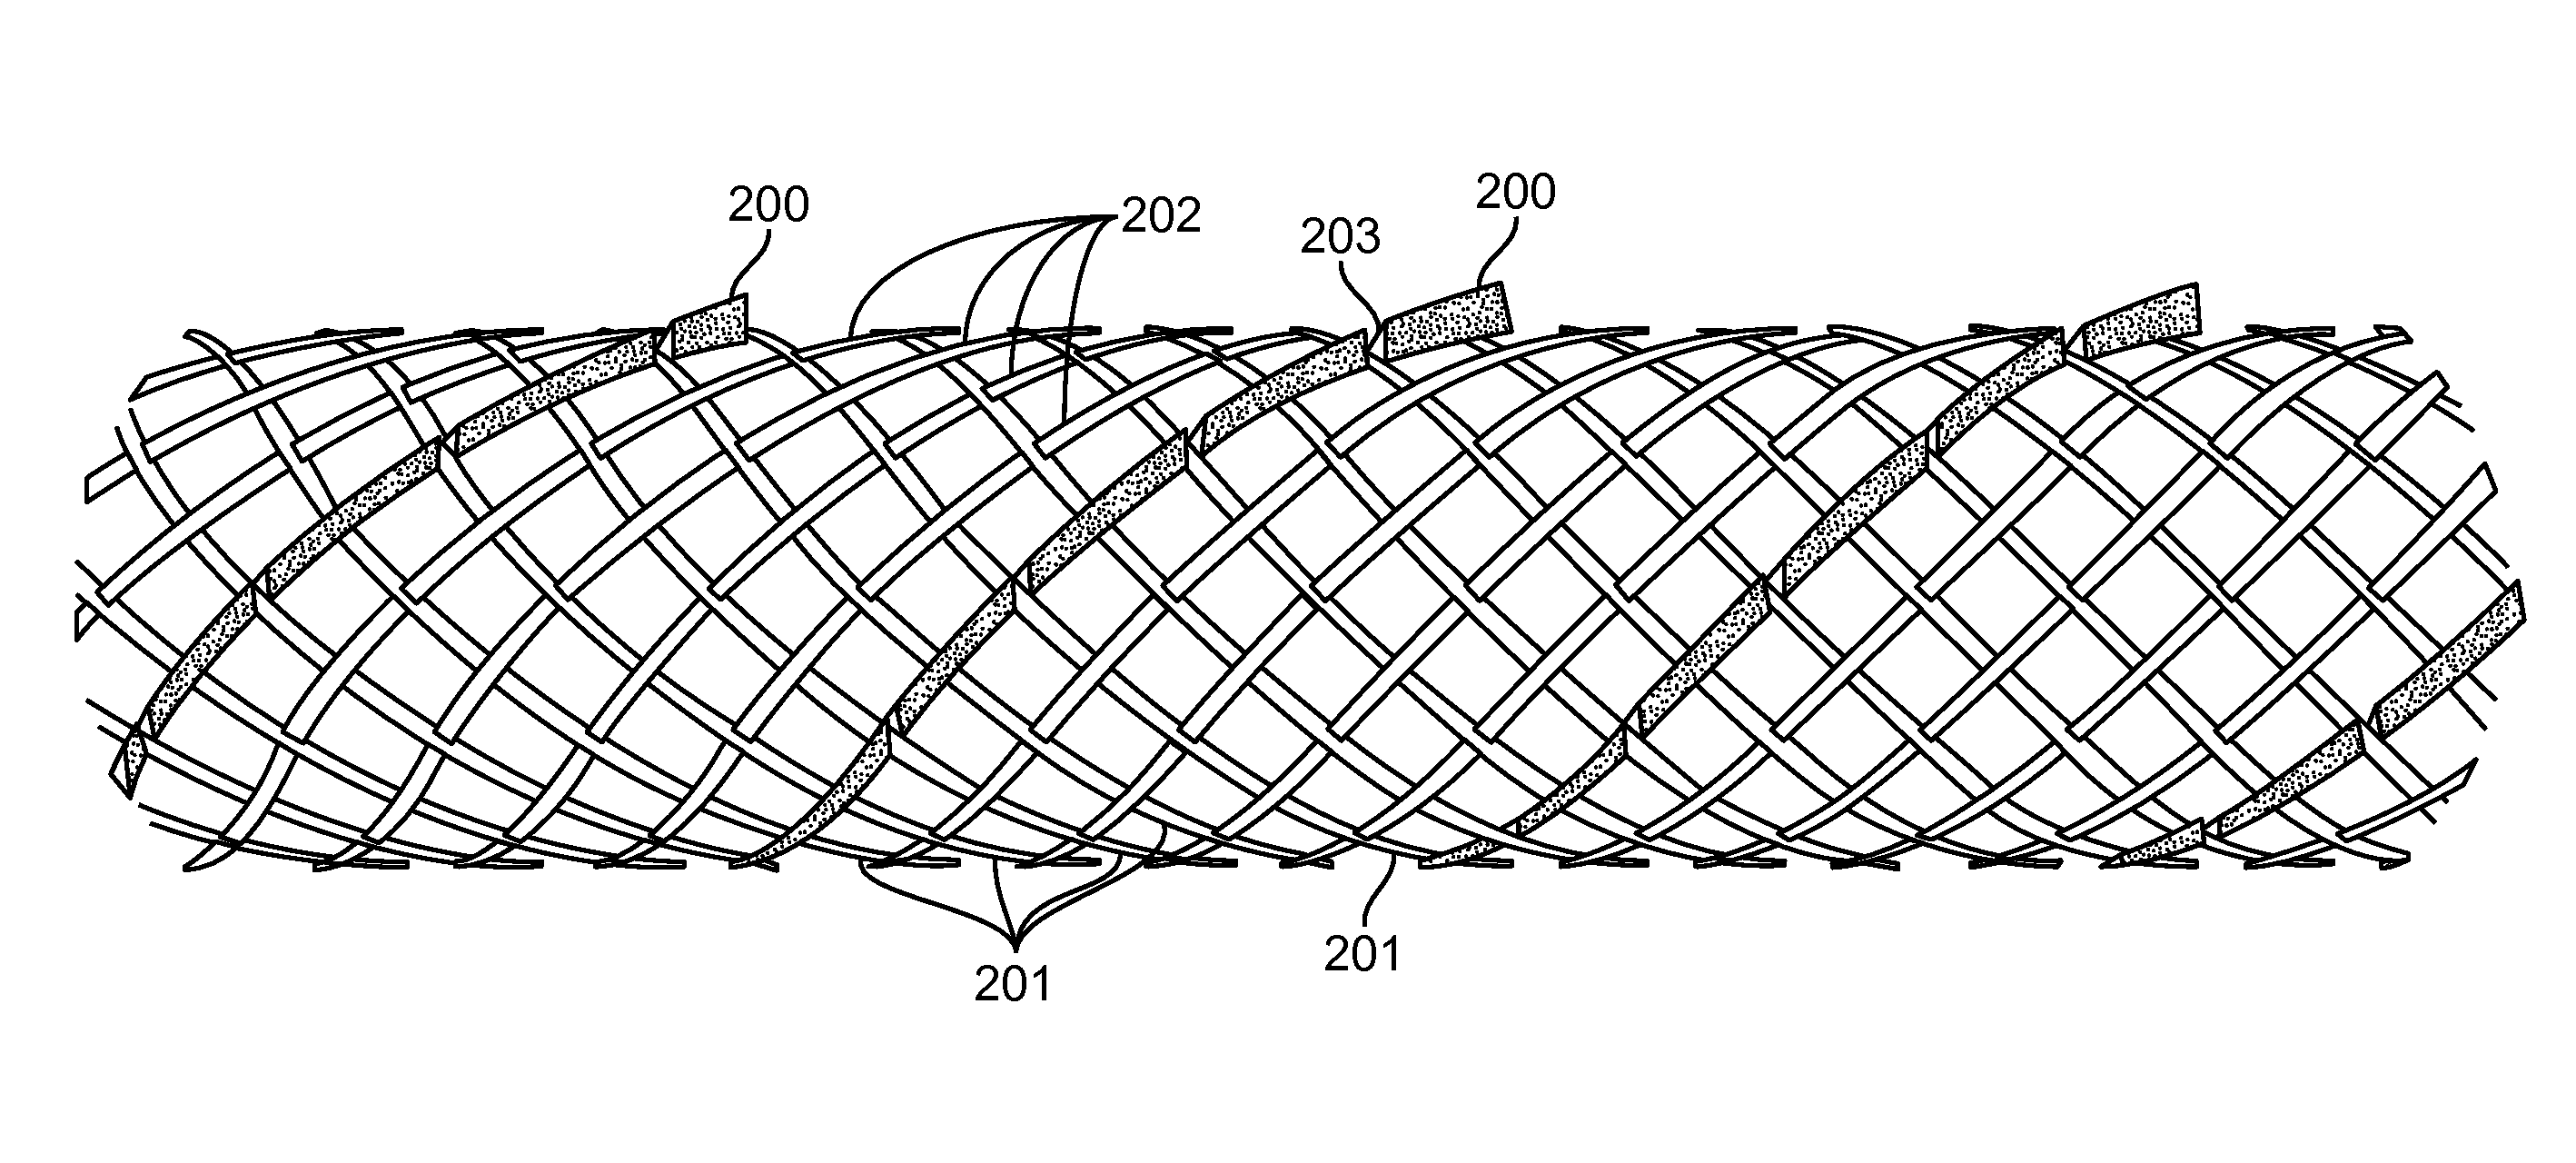 Temporary vascular scaffold and scoring device